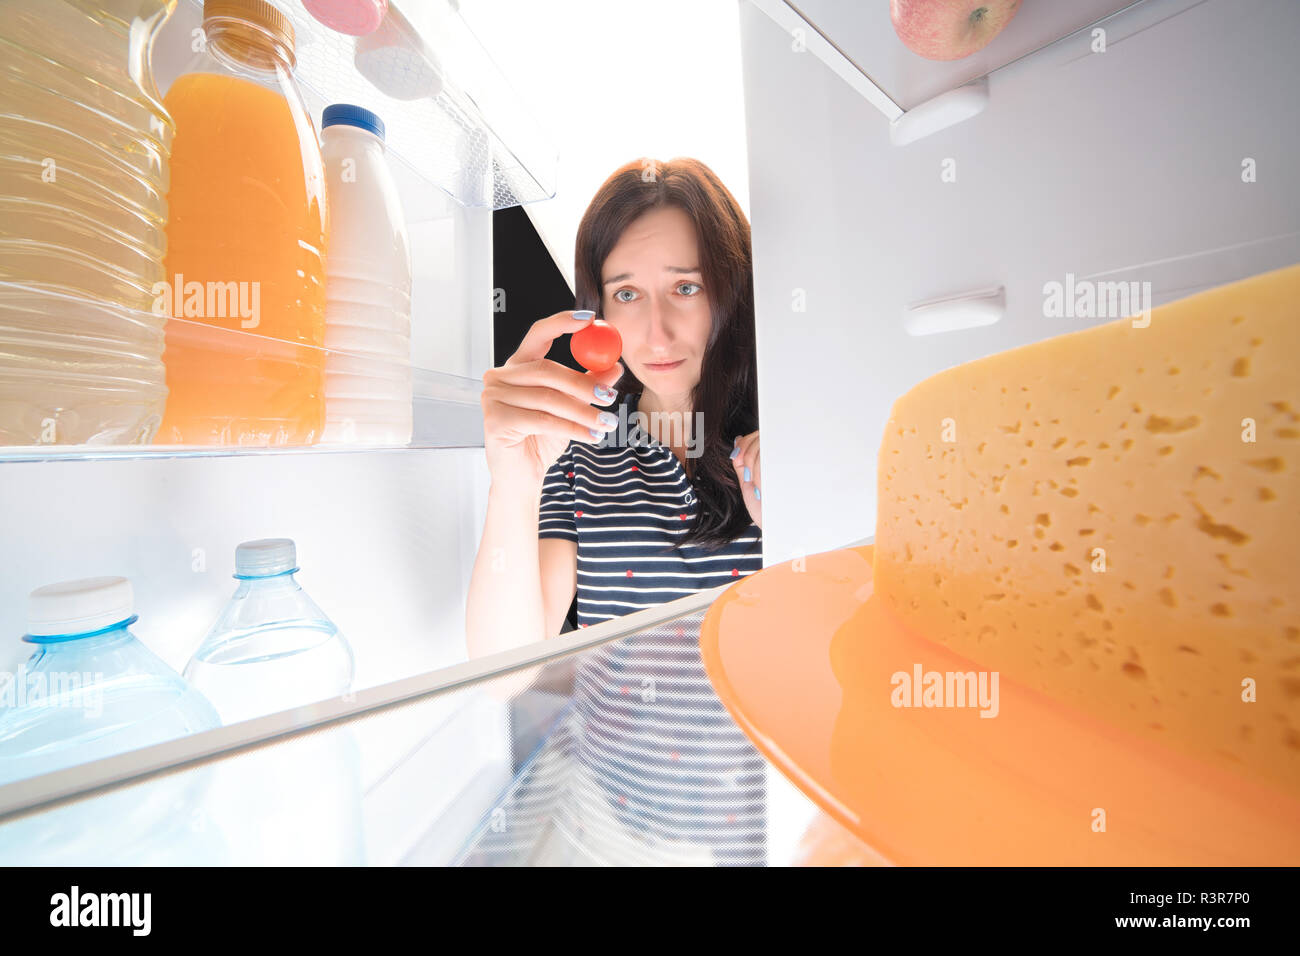 Sad girl looking into fridge and holding single tomatoes in her hand. Wide angle view from inside Stock Photo